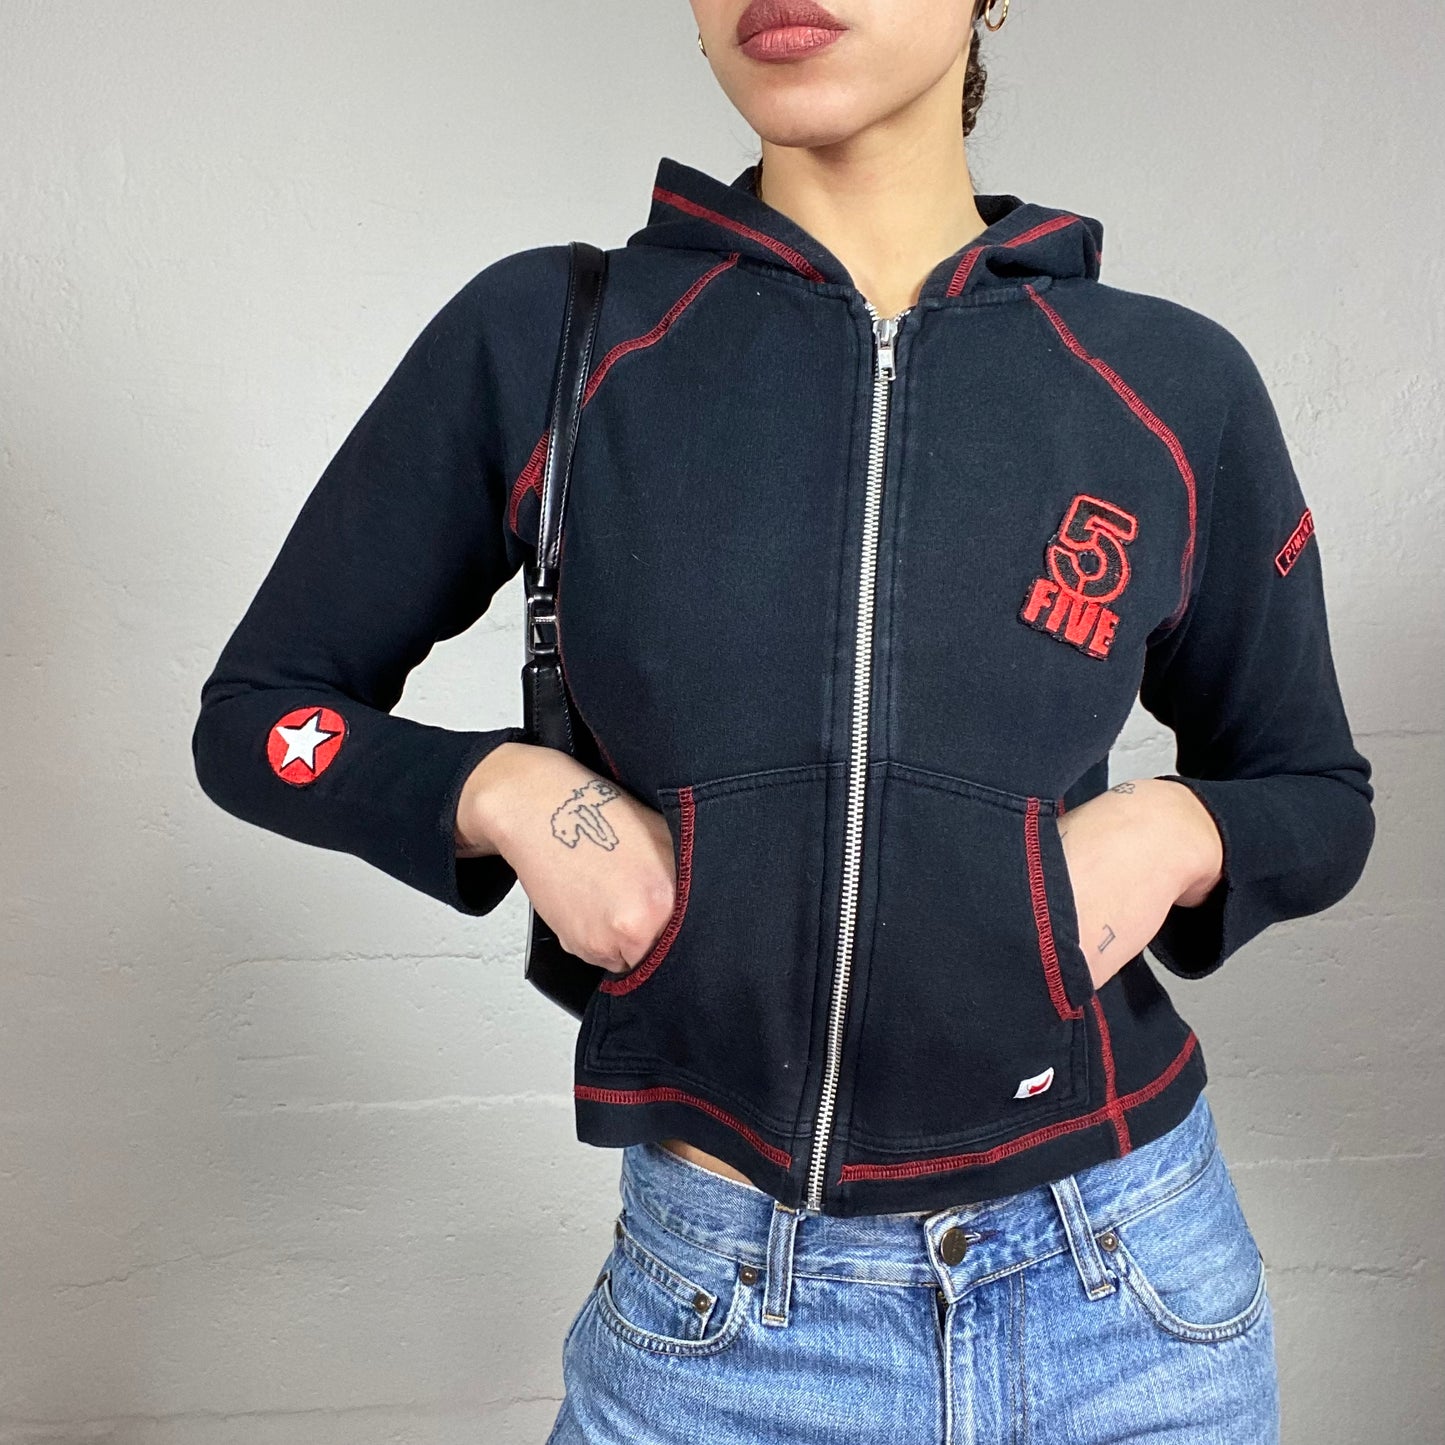 Vintage 2000's Downtown Girl Black Zip Up Jacket with Red Patches & Visible Seam Detail (S)